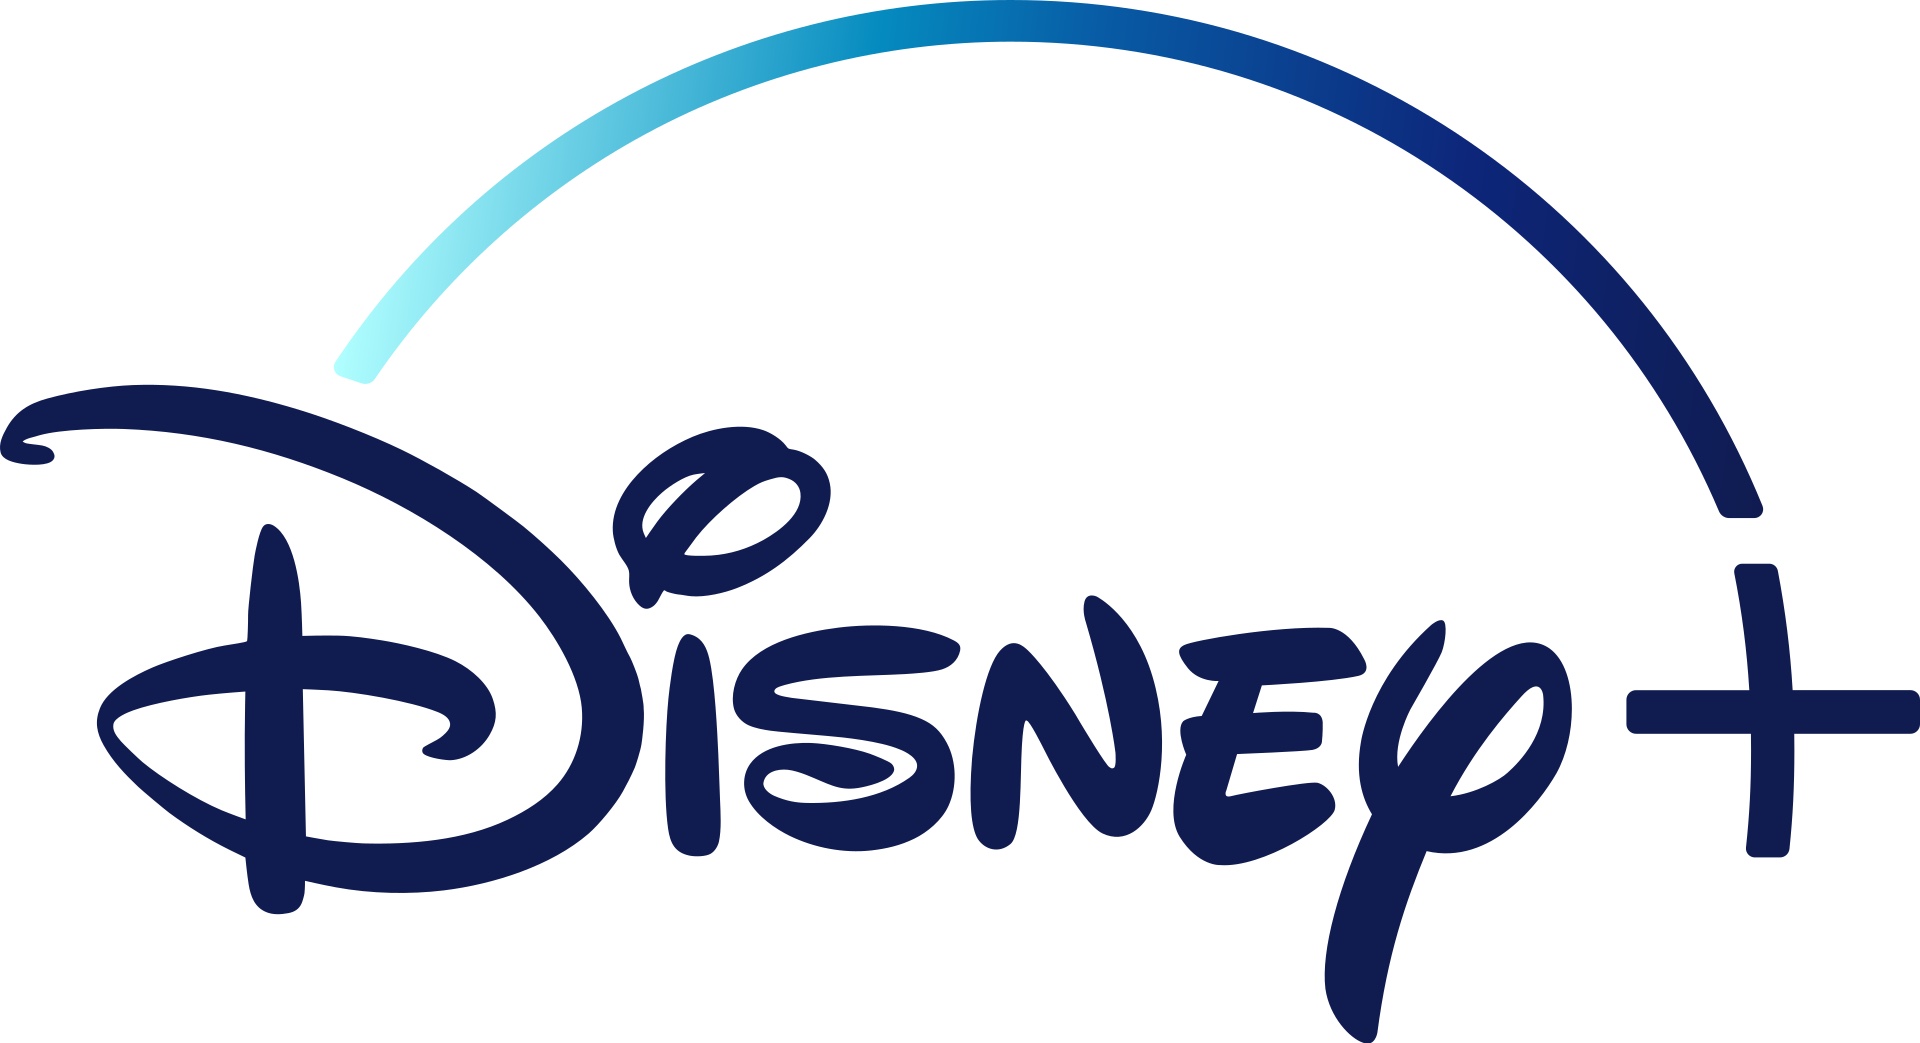 Save over 20% on your annual (69.99 €) or monthly (6.99 €) Disney + subscription before February 23.